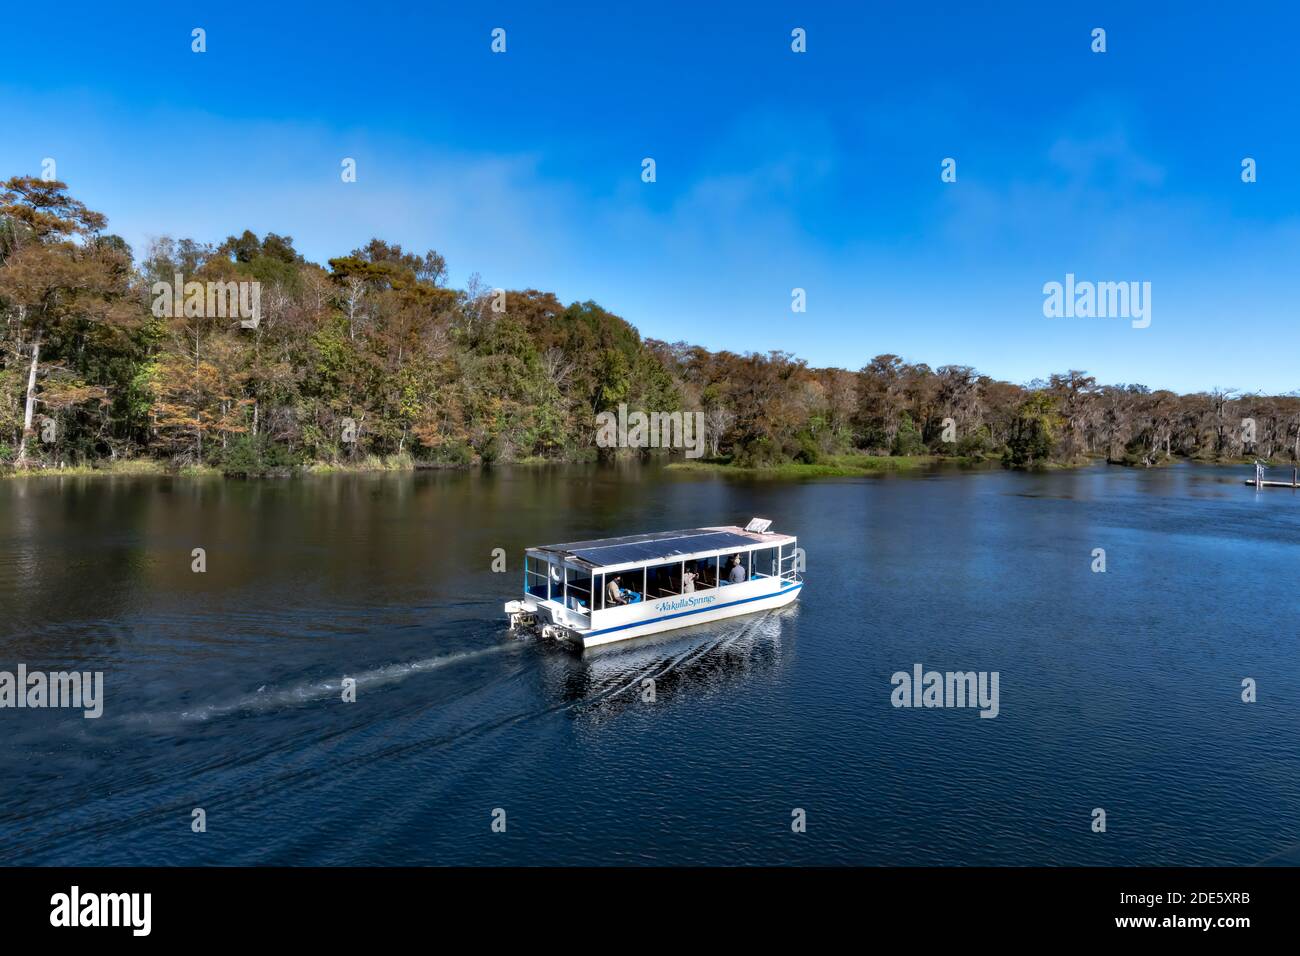 Tallahassee Florida USA November 24, 2020. One of the guided boat tour boats crusing over the world’s largest and deepest freshwater springs. Tour the Stock Photo